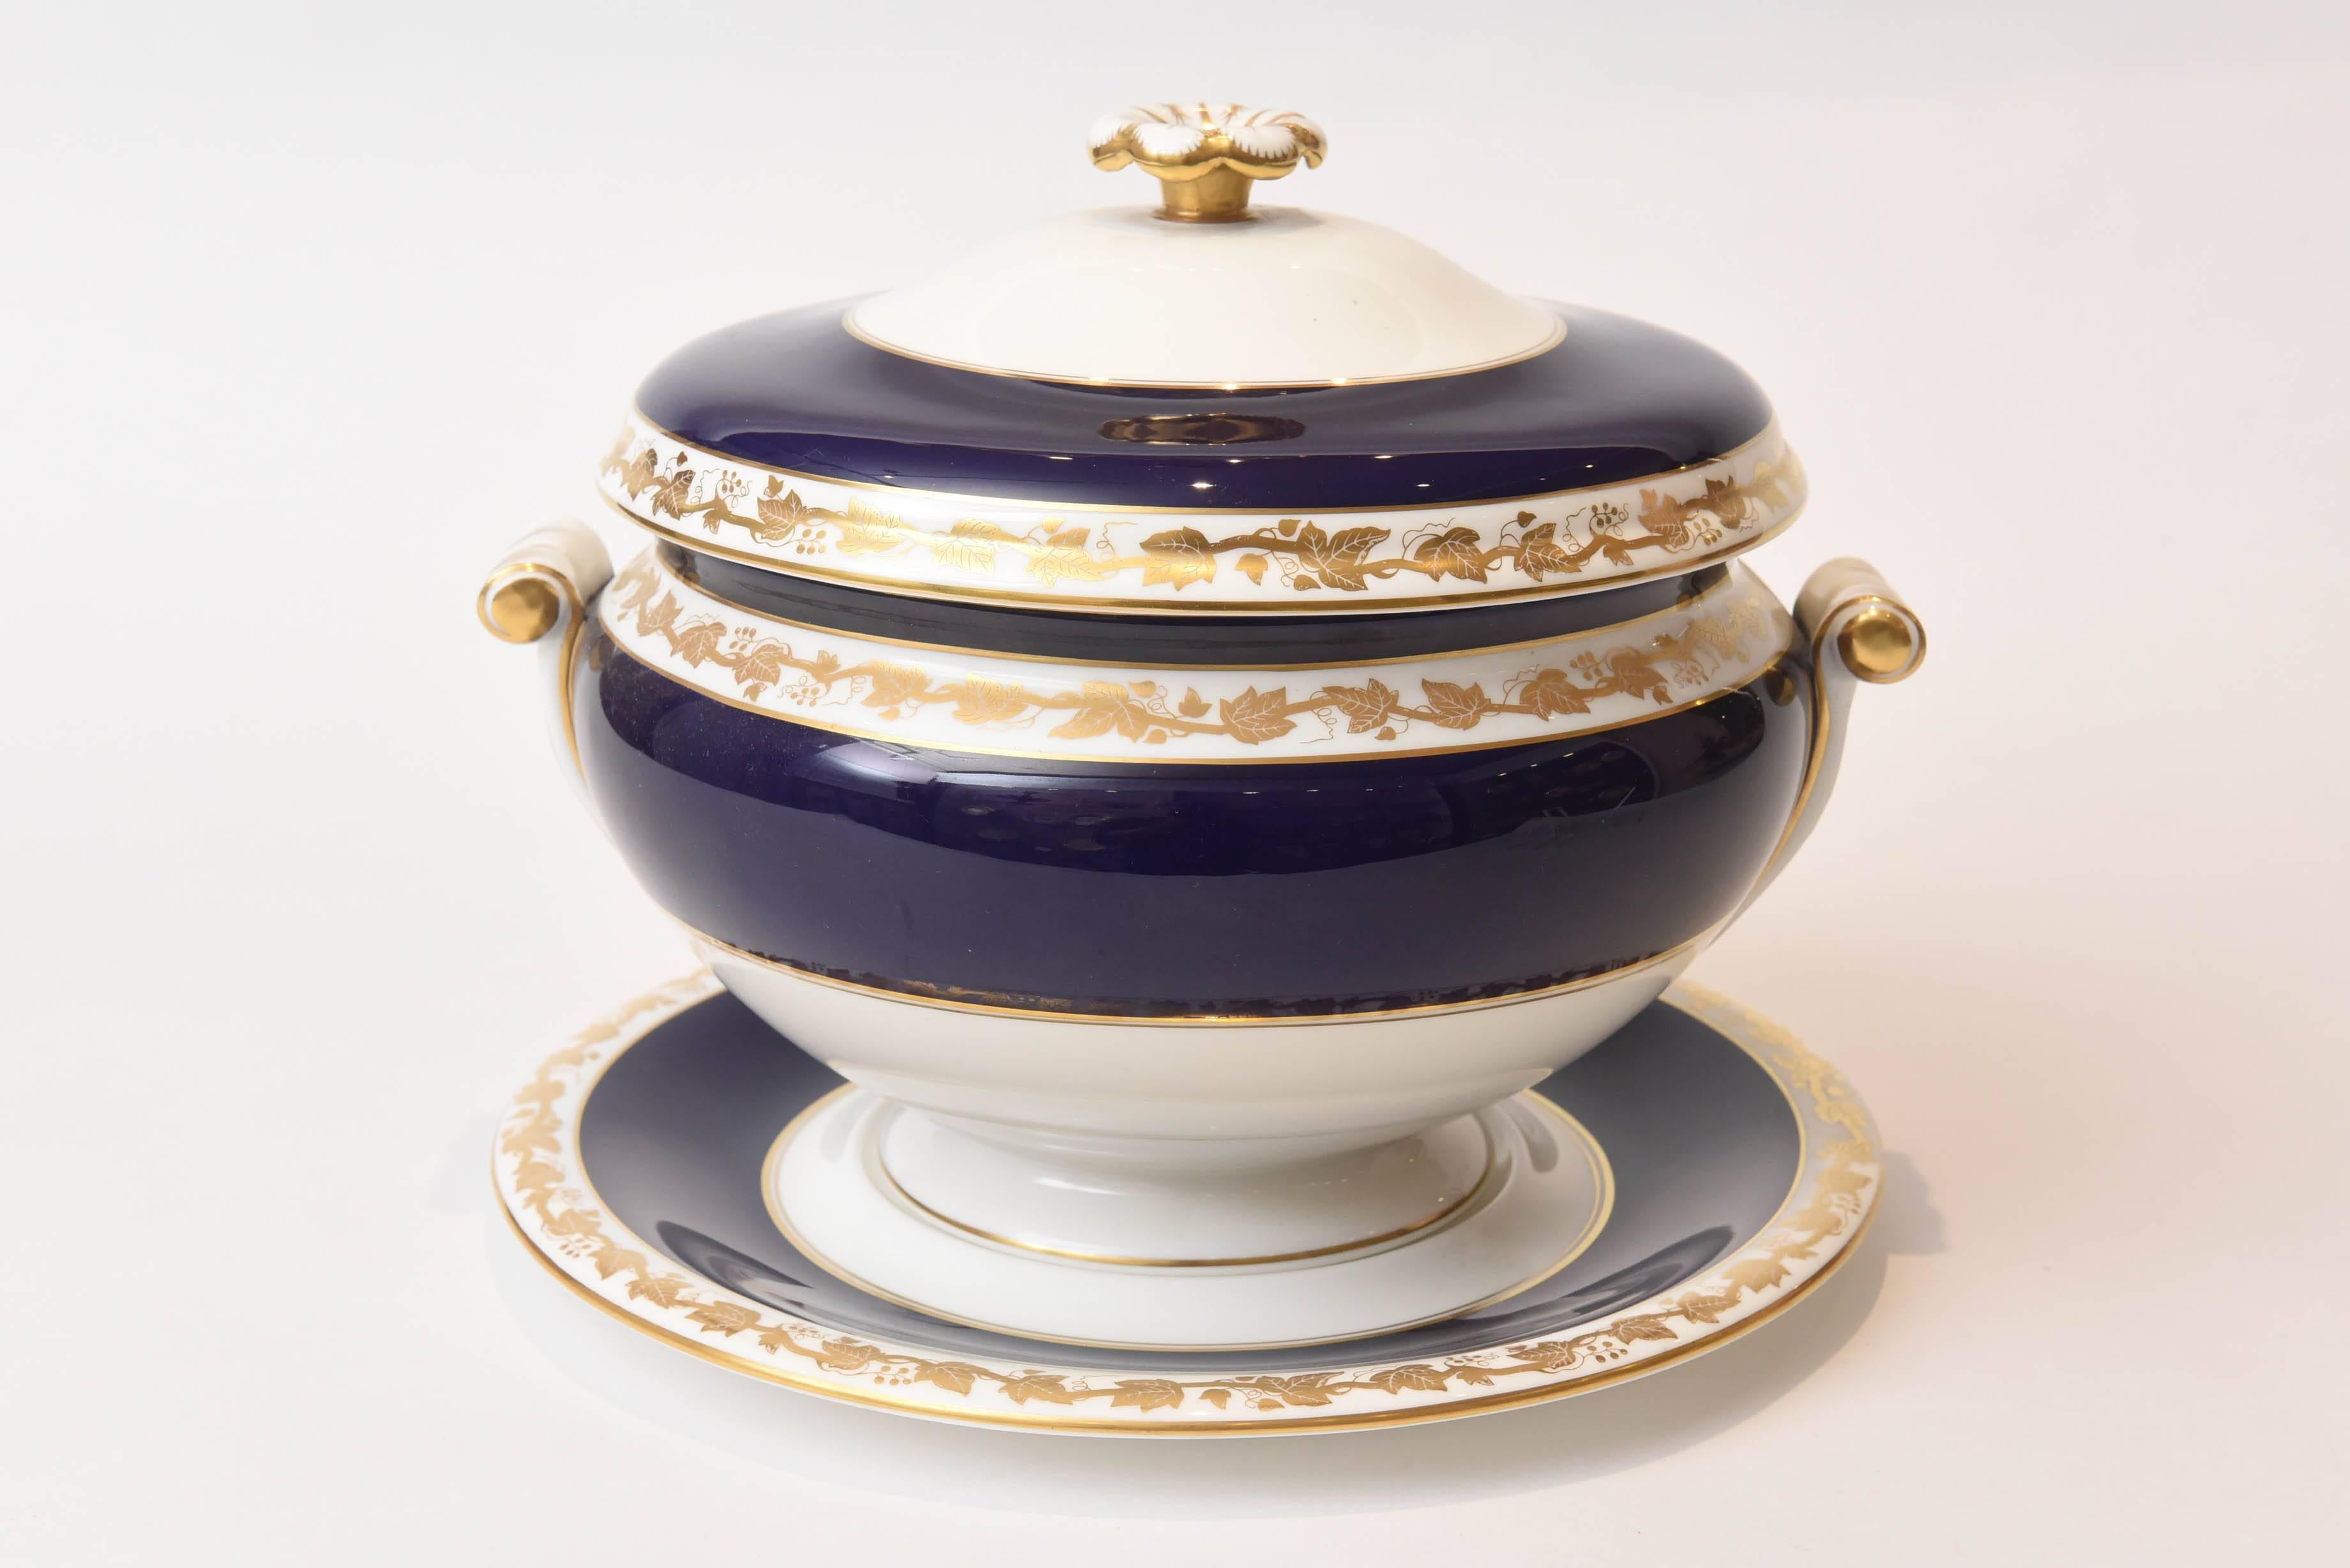 A Classic pattern by Wedgwood, England in super vintage condition. Wonderful pedestal base on a fitted undertray with a delightful finial top and handles. Trimmed and highlighted in 24-karat gold on a cobalt blue ground. A rare and hard to find